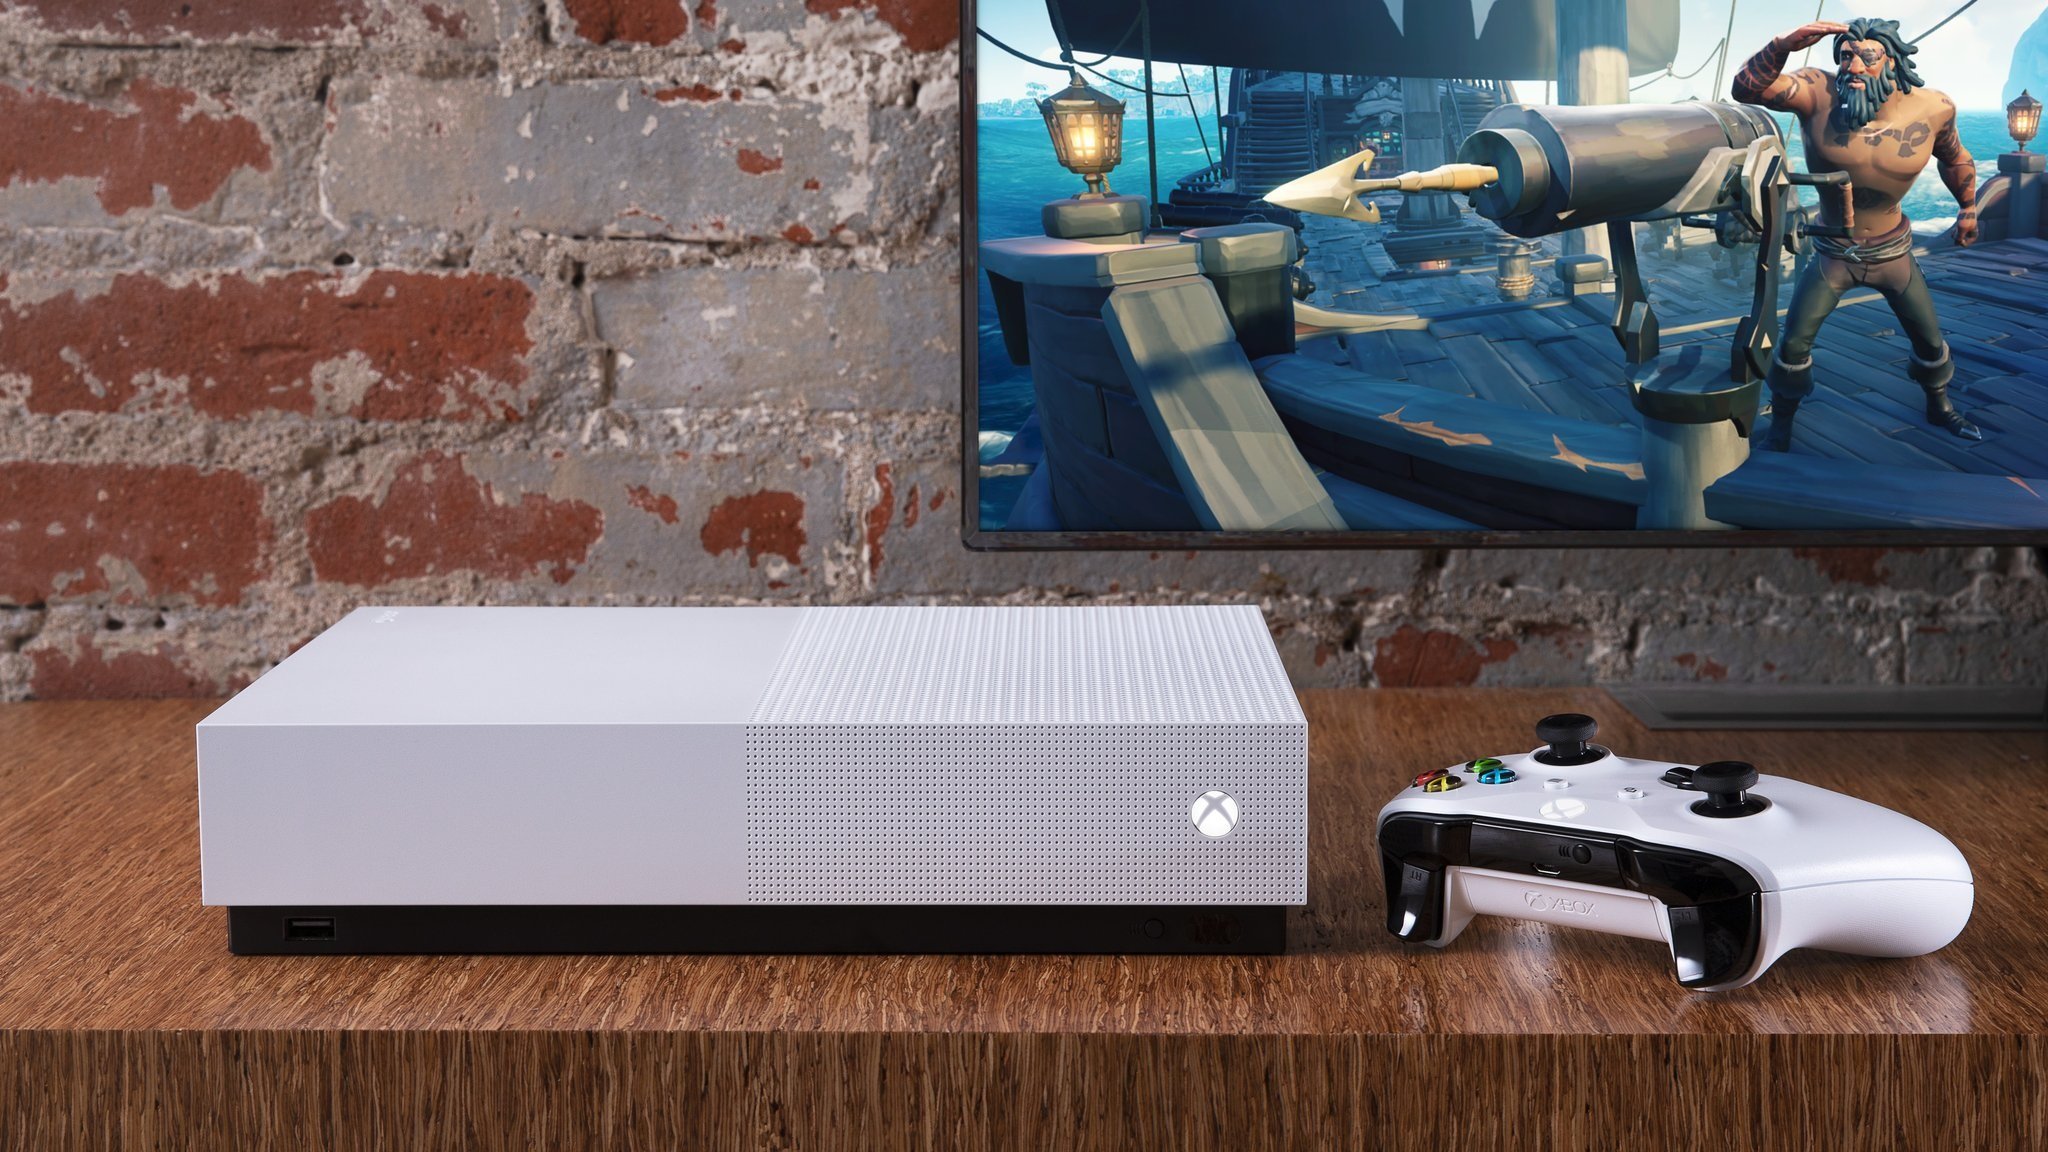 Microsoft confirms new subscription service, combining Xbox One console,  Xbox Live and Game Pass